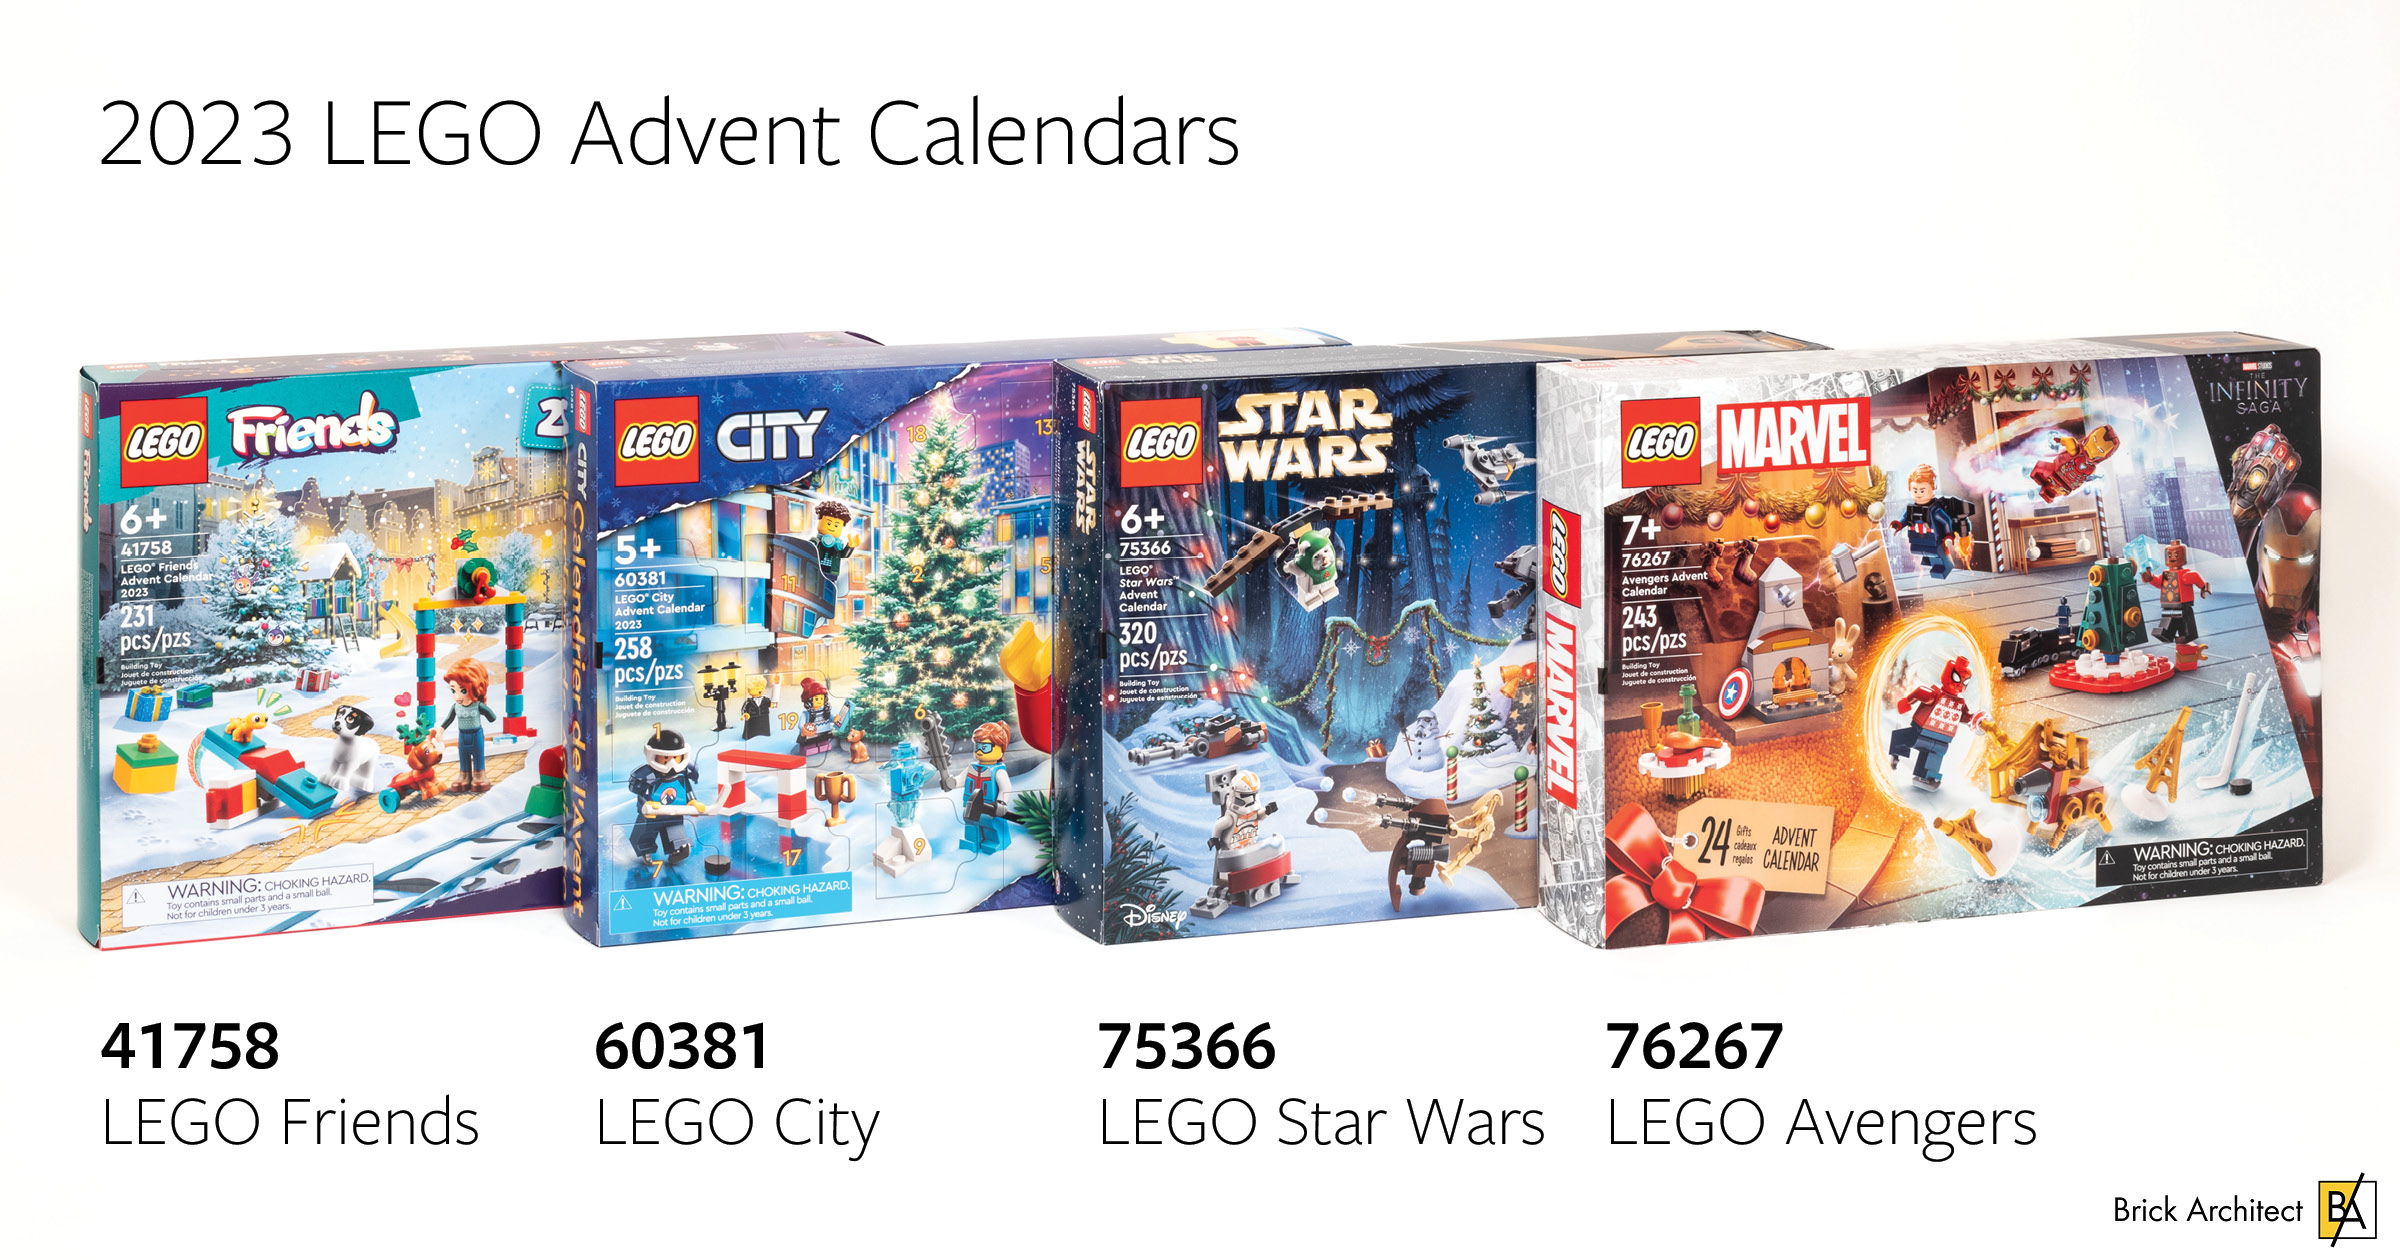 2023 Star wars Advent Calendar -- The One With 24 Little Doors